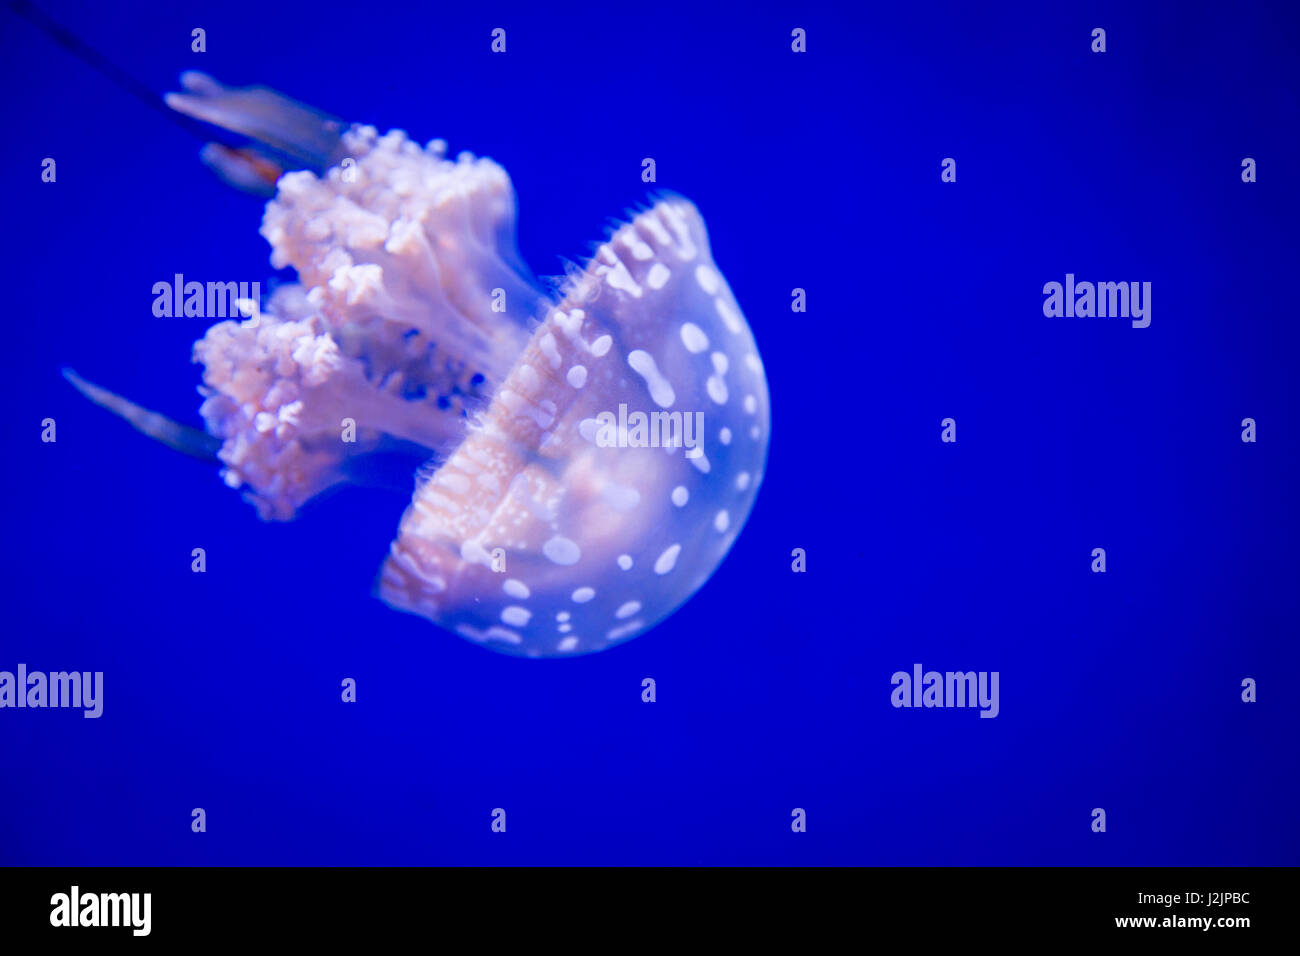 single small white jellyfish with white spots on a blue background Stock Photo